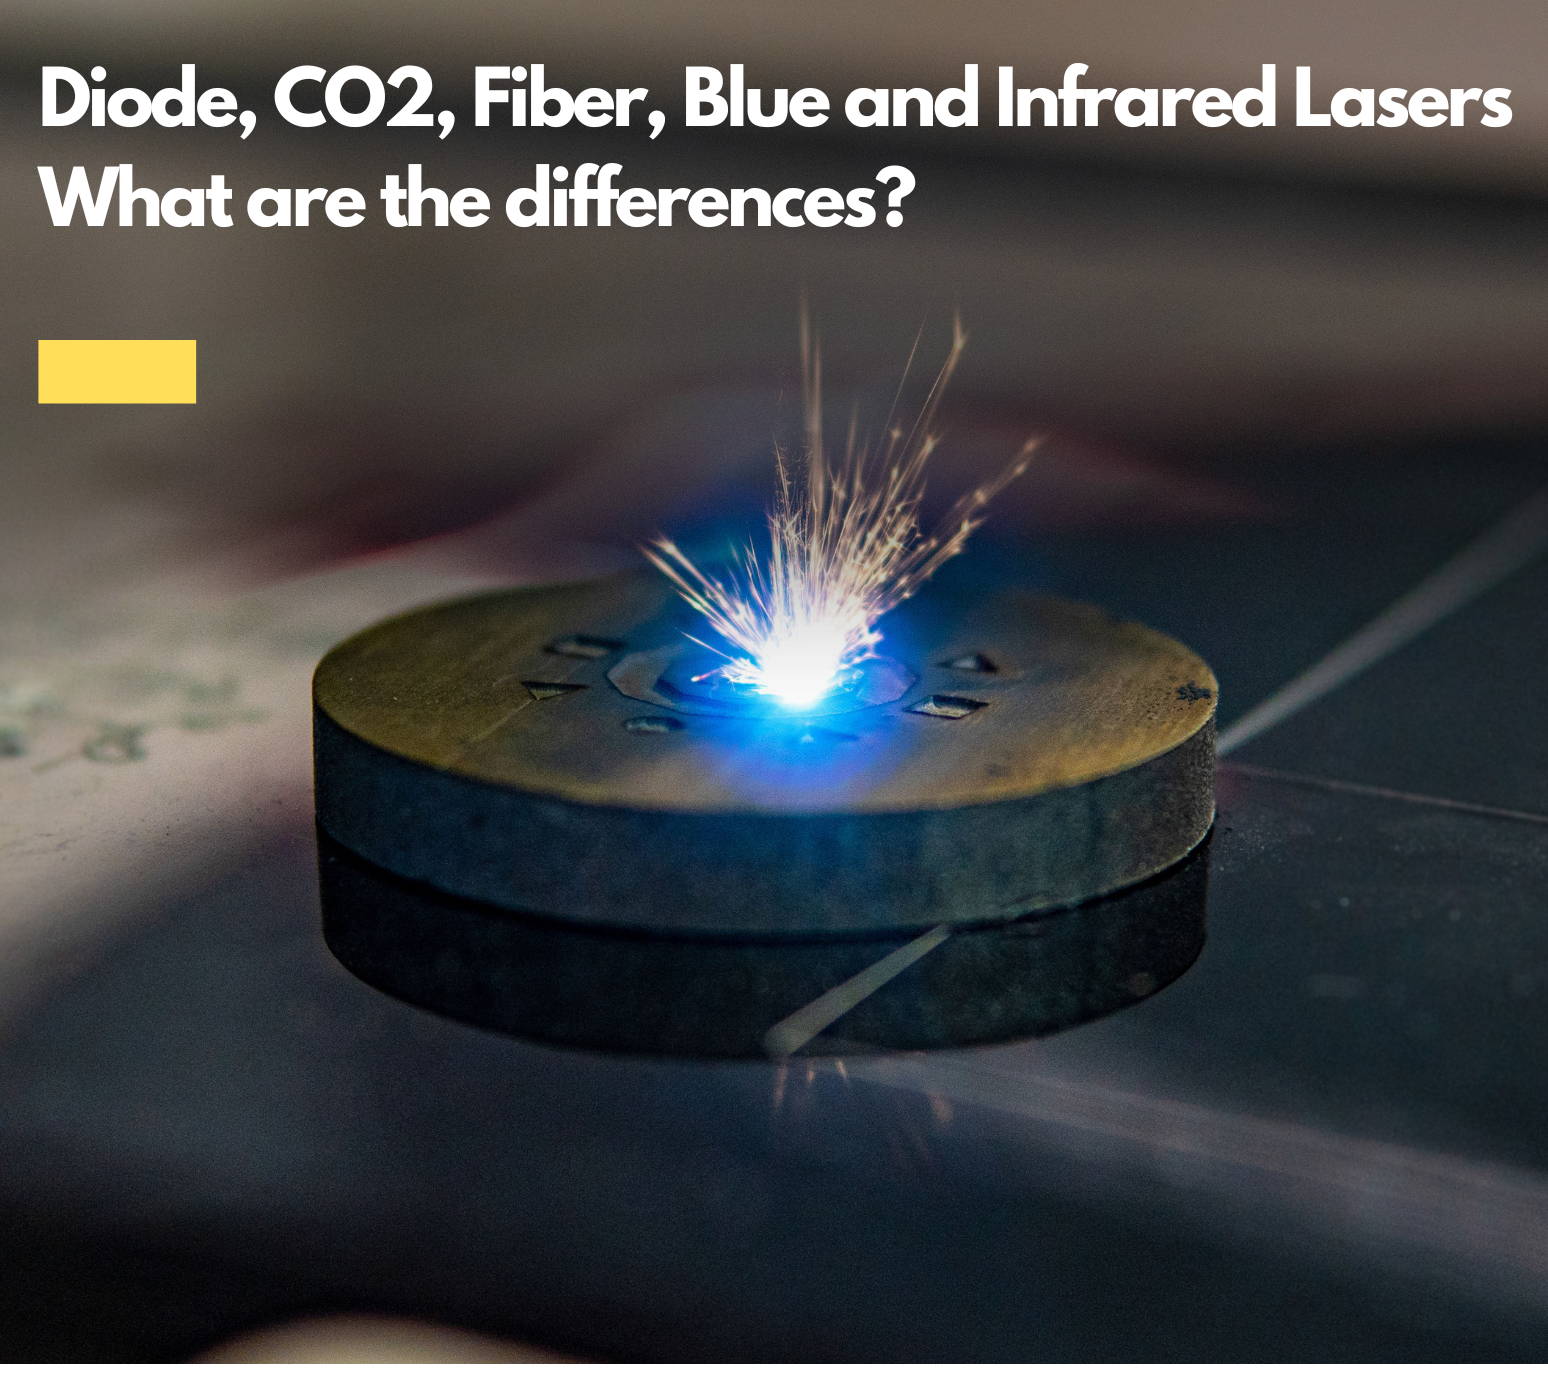 Diode, CO2, Fiber, Blue, Infrared Lasers, What Are The Differences?